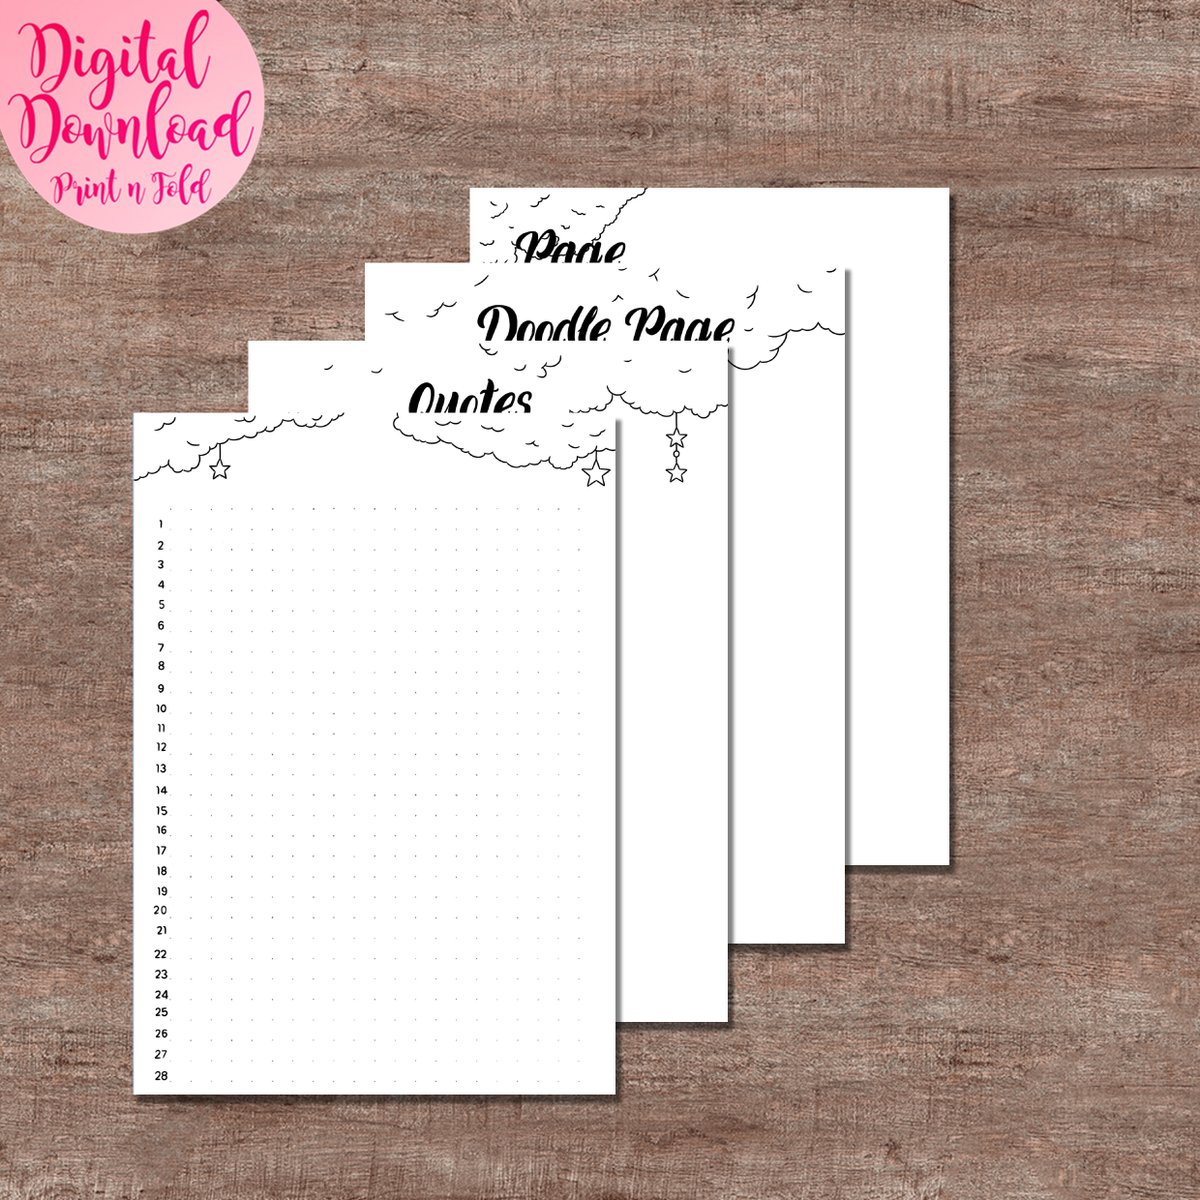 Are you ready for April?

etsy.me/3M1b8vd 

#plannerpages #fullmonth #trackers #printable #printathome #clouds #april #calendars #moodtrackers #lifeplanning #lists #savings #logpages